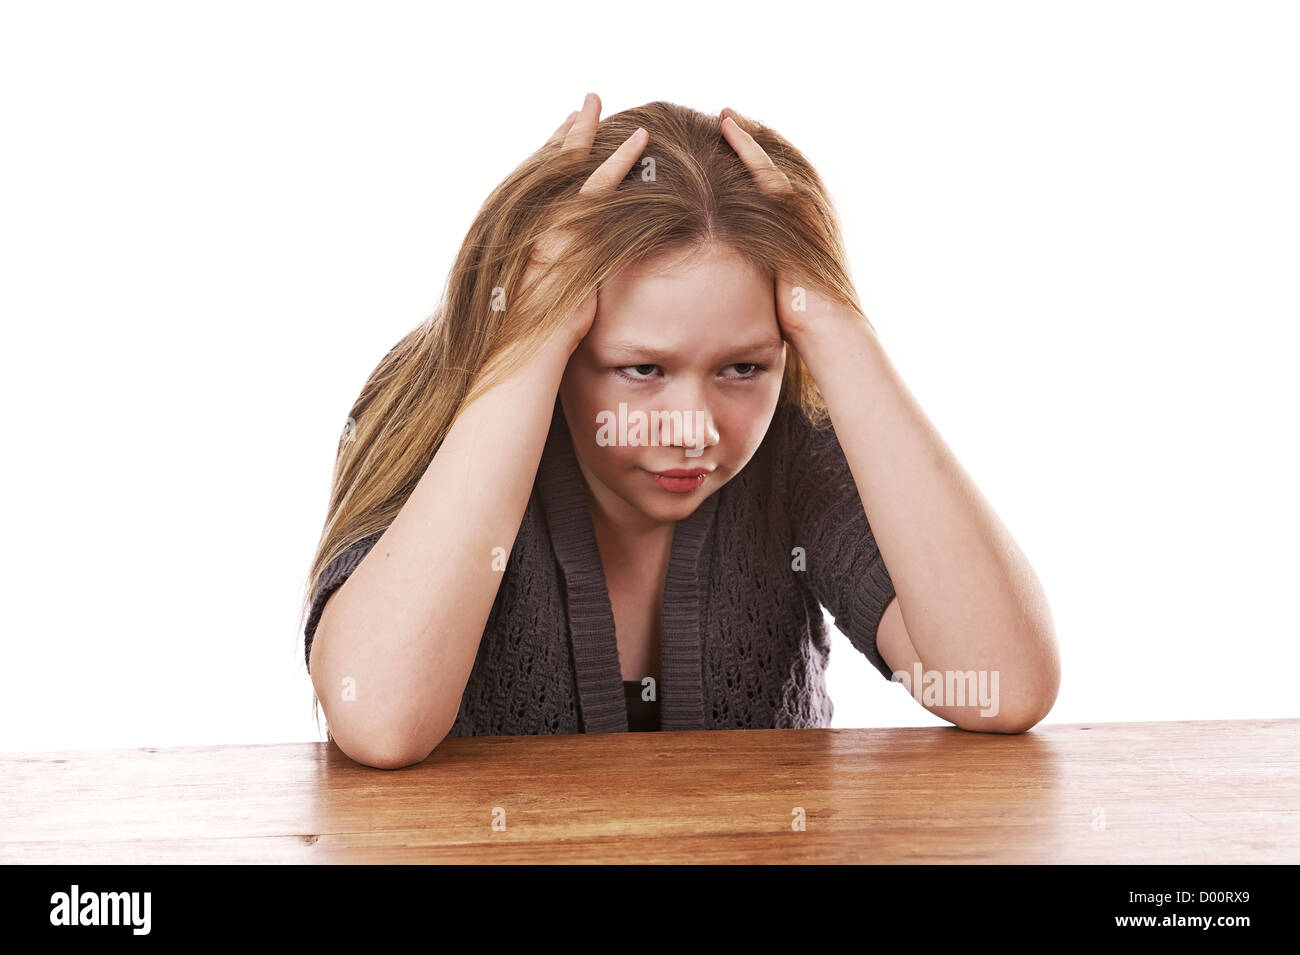 Sad and frustrated young girl sitting by table on white background Stock Photo